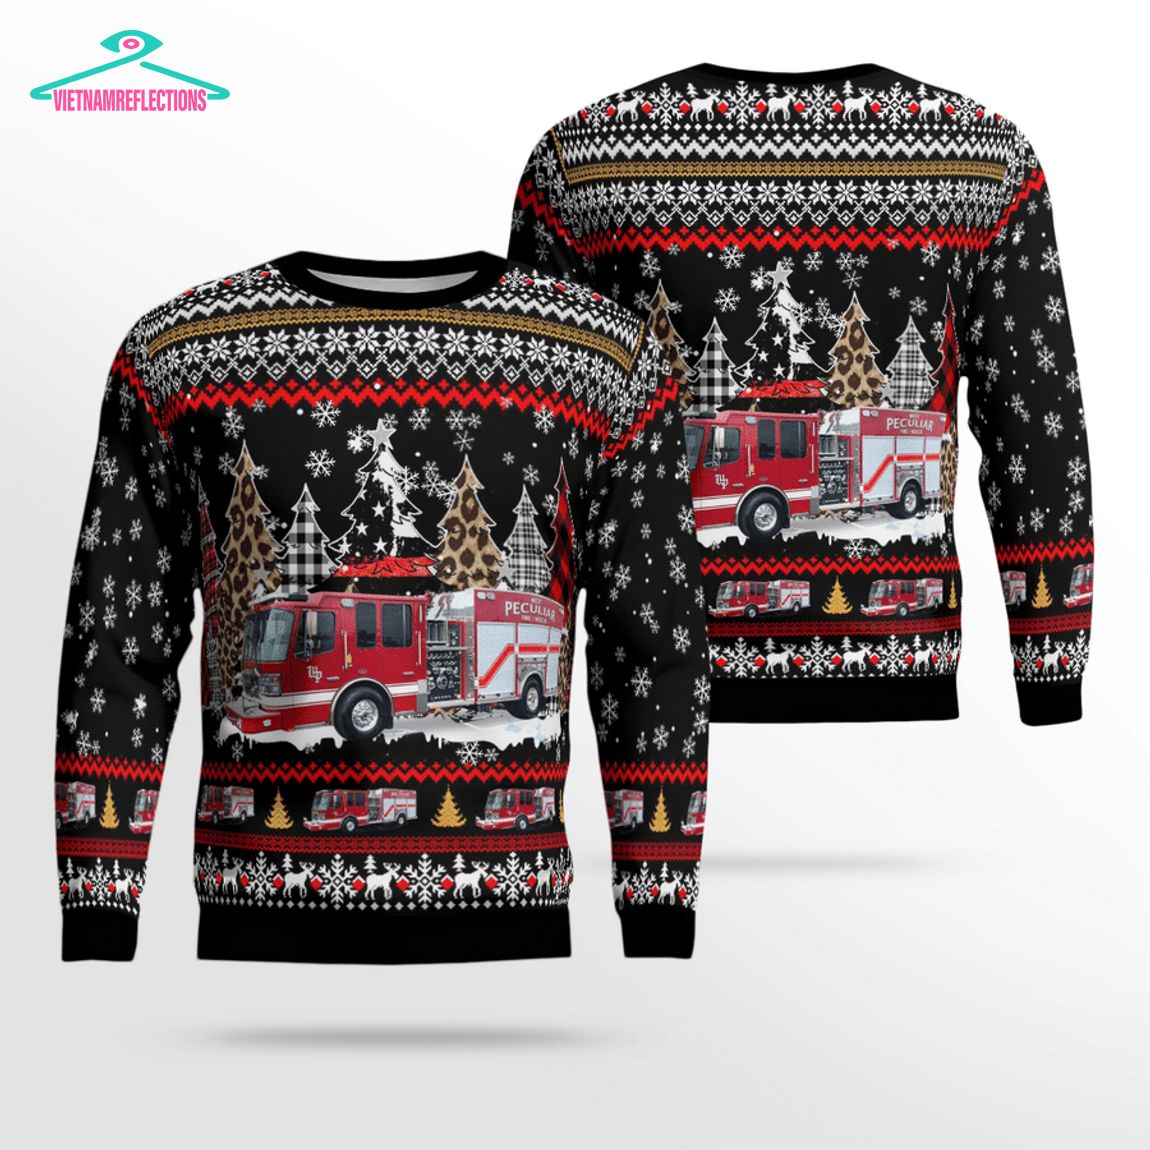 West Peculiar Fire Protection District 3D Christmas Sweater